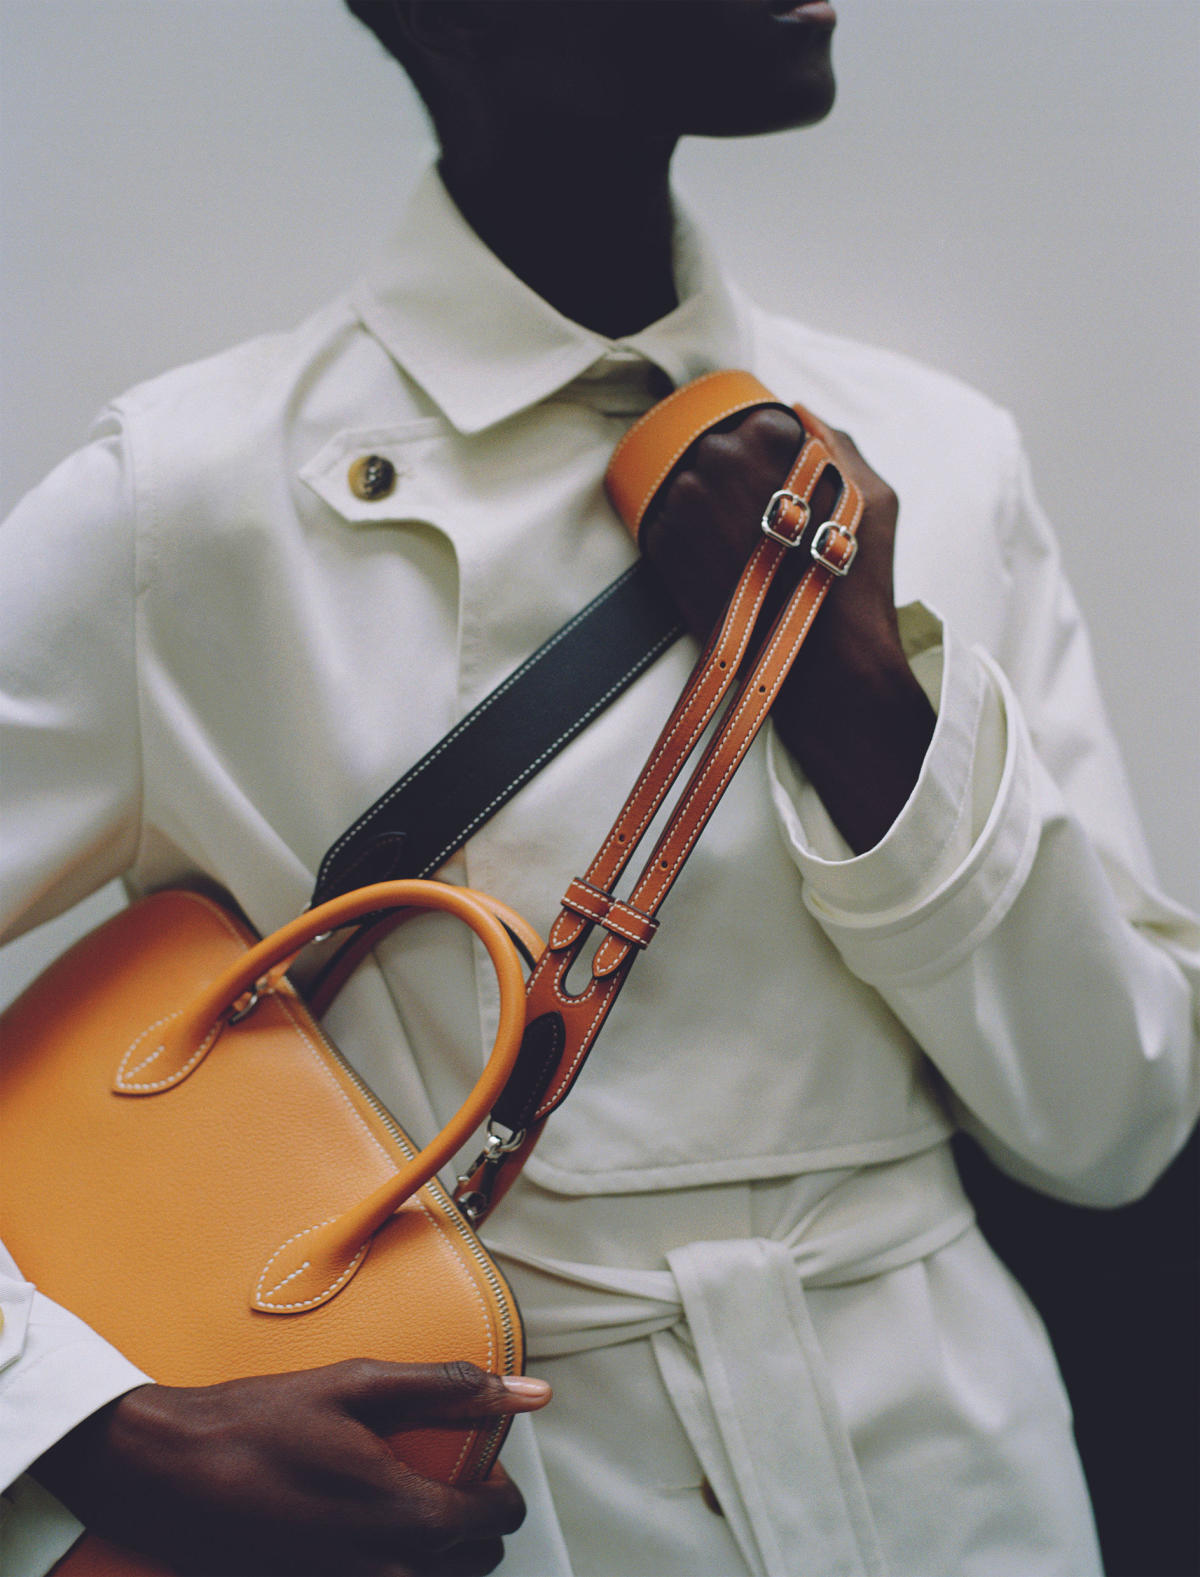 How to Maintain the Value of Your Hermès Birkin Bag